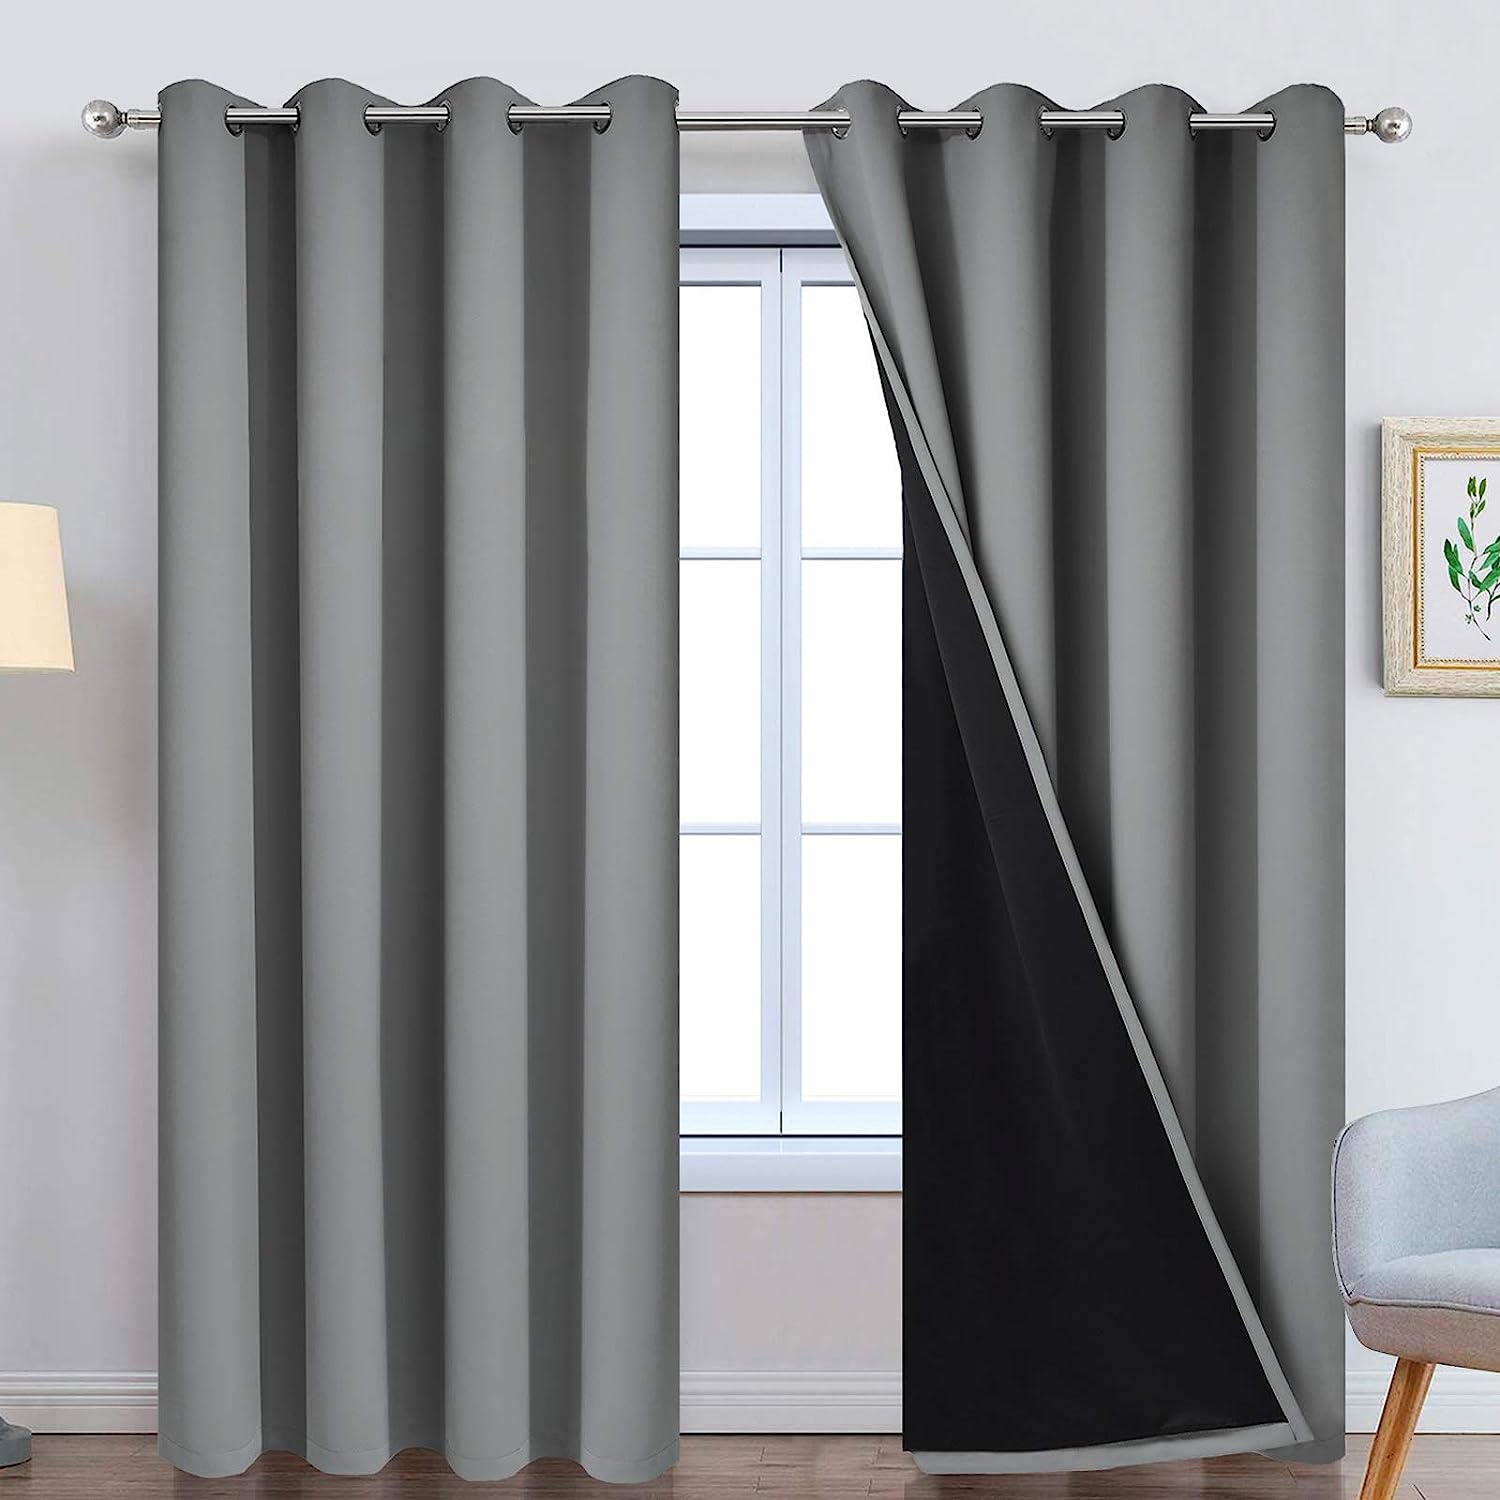 Yakamok 100% Blackout Curtains 84 Inches Long, 2 Thick [...]